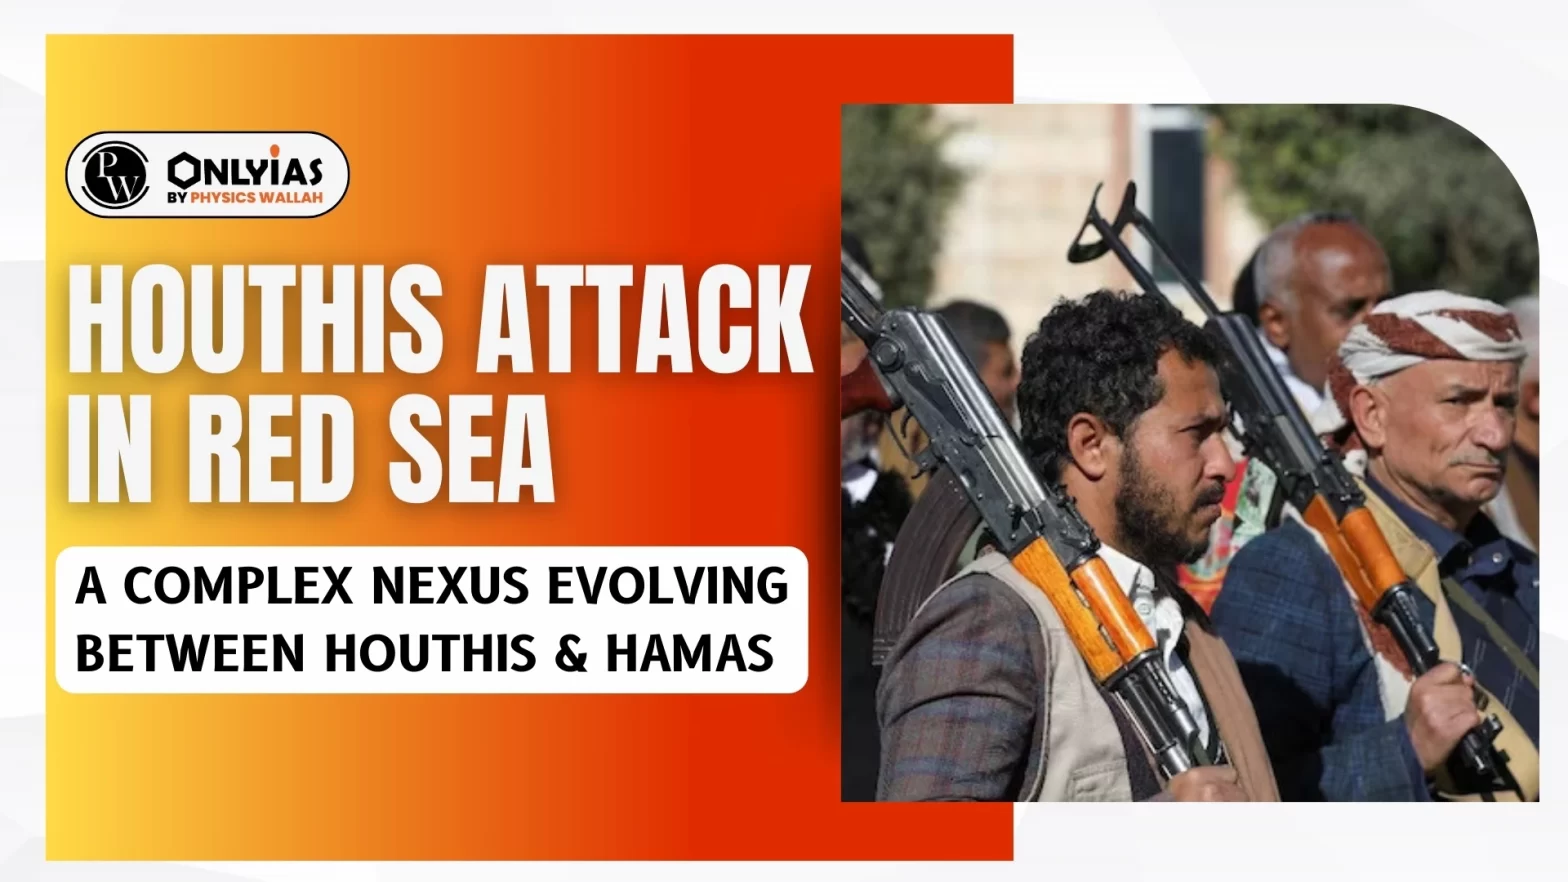 Houthis Attack in Red Sea – A Complex Nexus Evolving between Houthis & Hamas